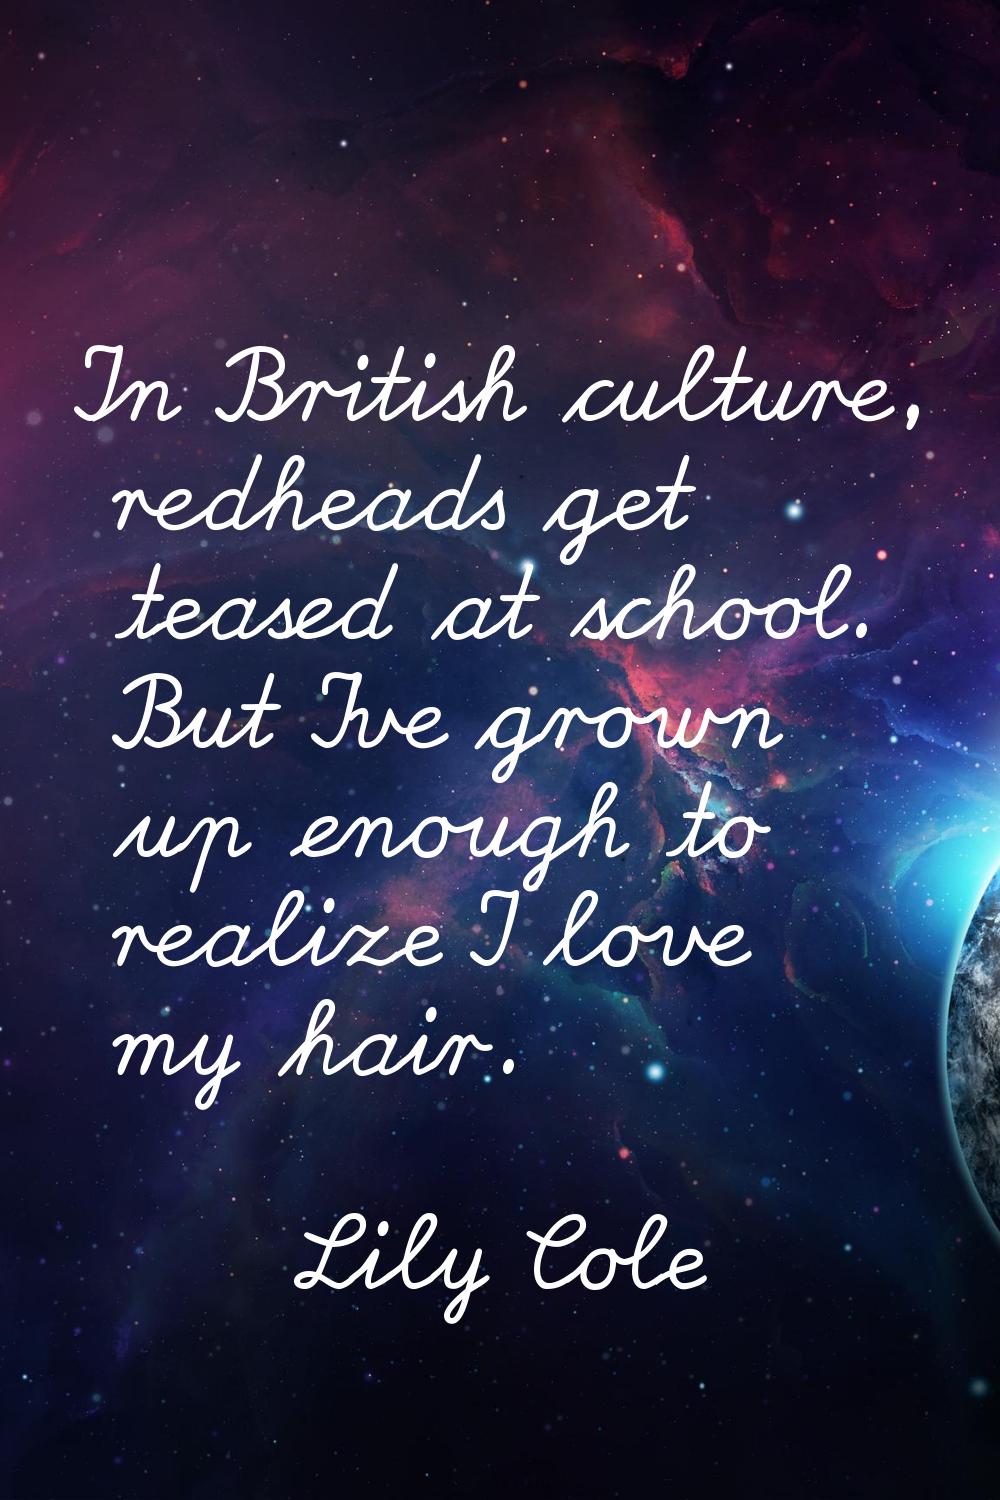 In British culture, redheads get teased at school. But I've grown up enough to realize I love my ha